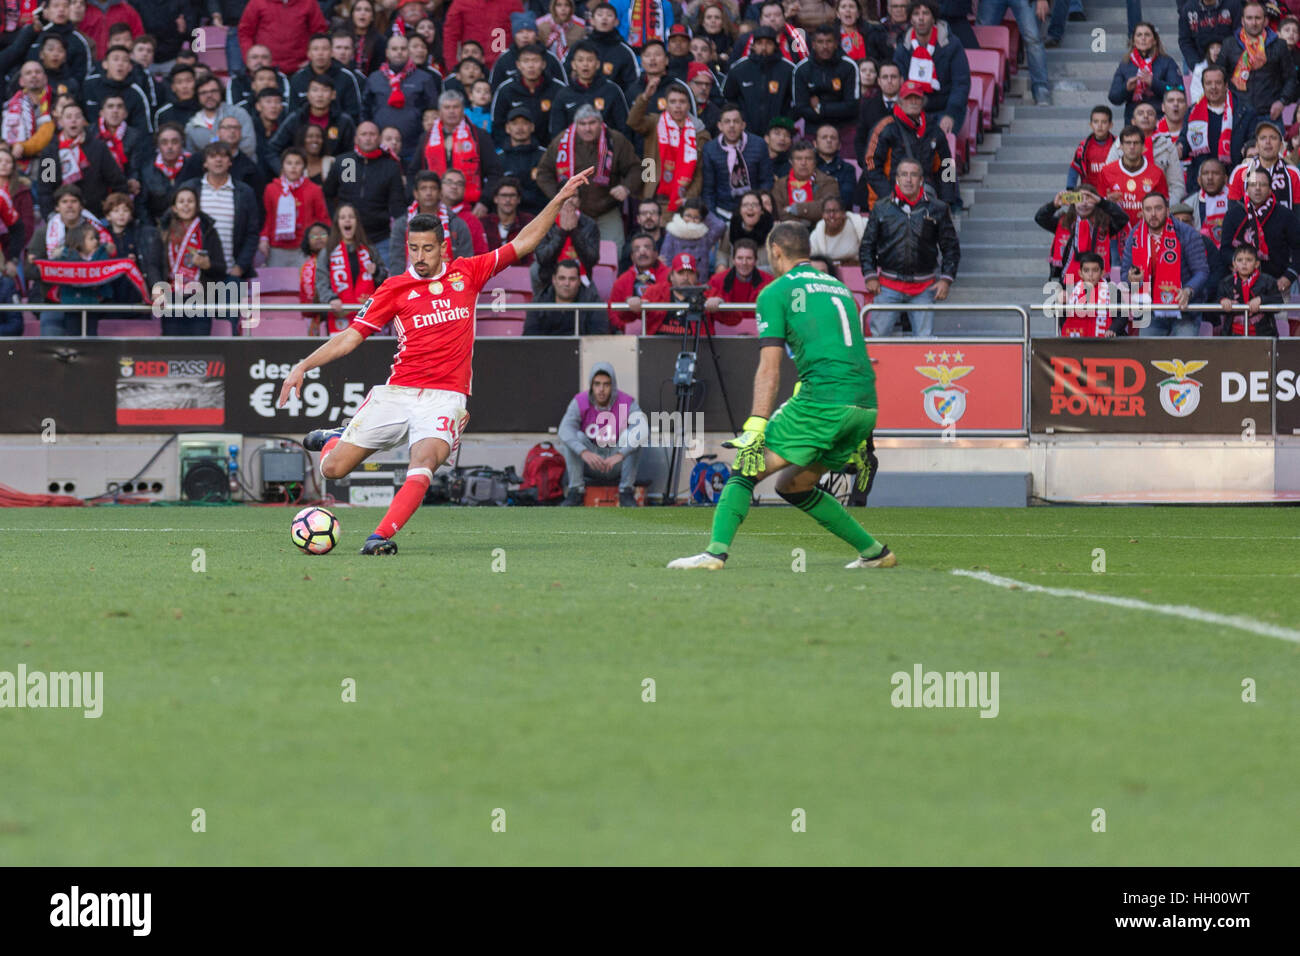 Lisbon, Portugal. 14th January, 2017.Benfica's defender from Portugal Andre Almeida (34) in action during the game SL Benfica v Boavista FC in Lisbon, Portugal. © Alexandre de Sousa/Alamy Live News Stock Photo